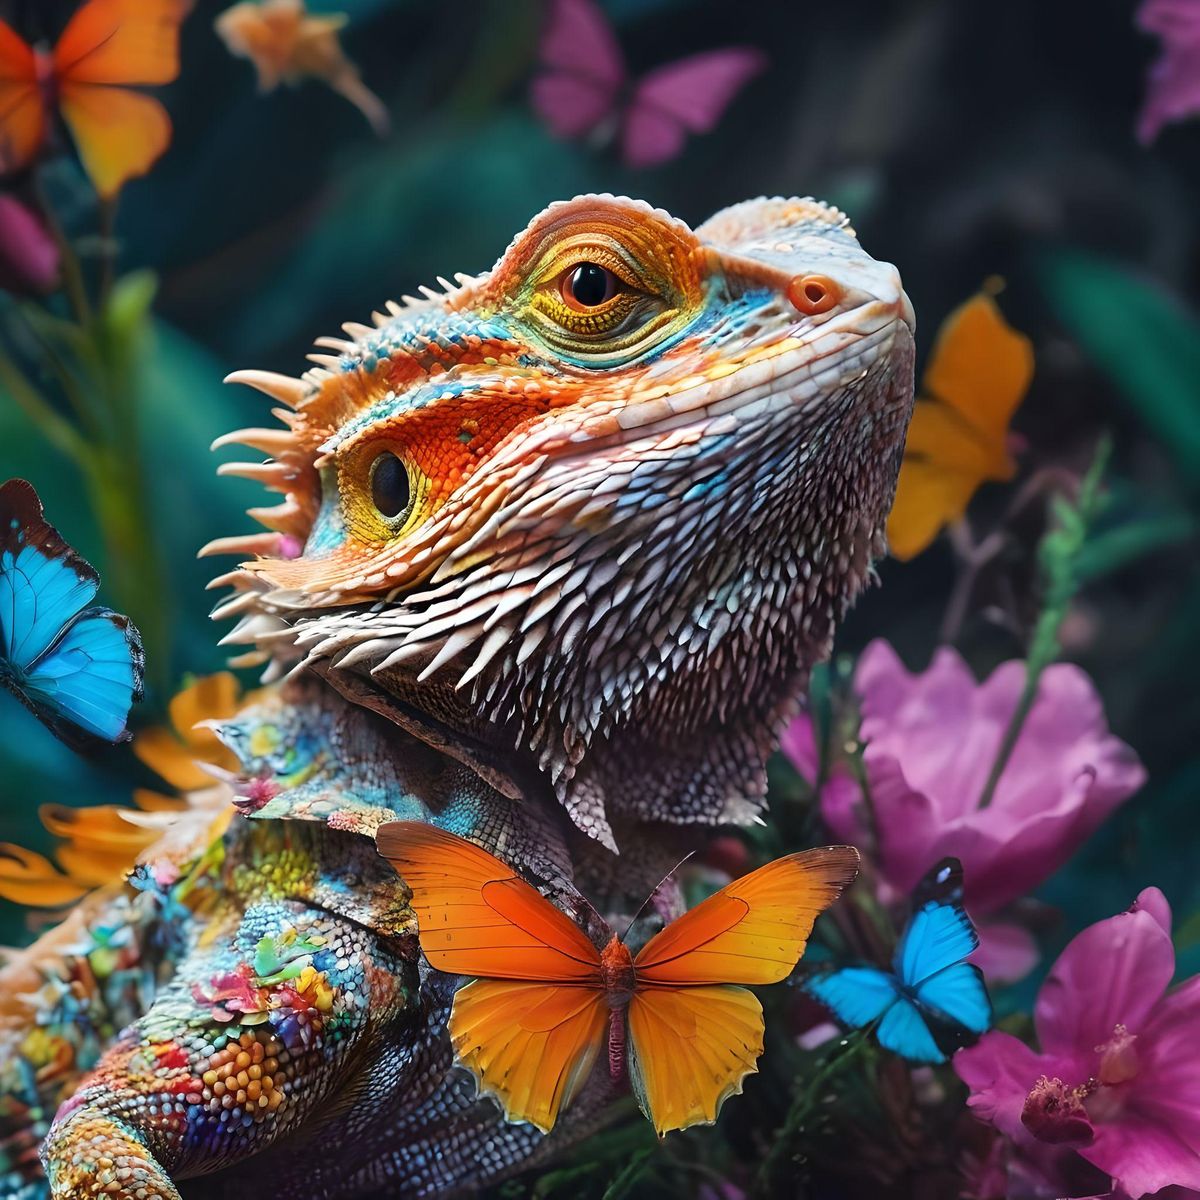 
mythical bearded dragon with vibrant colors butterflies with mythical flowers